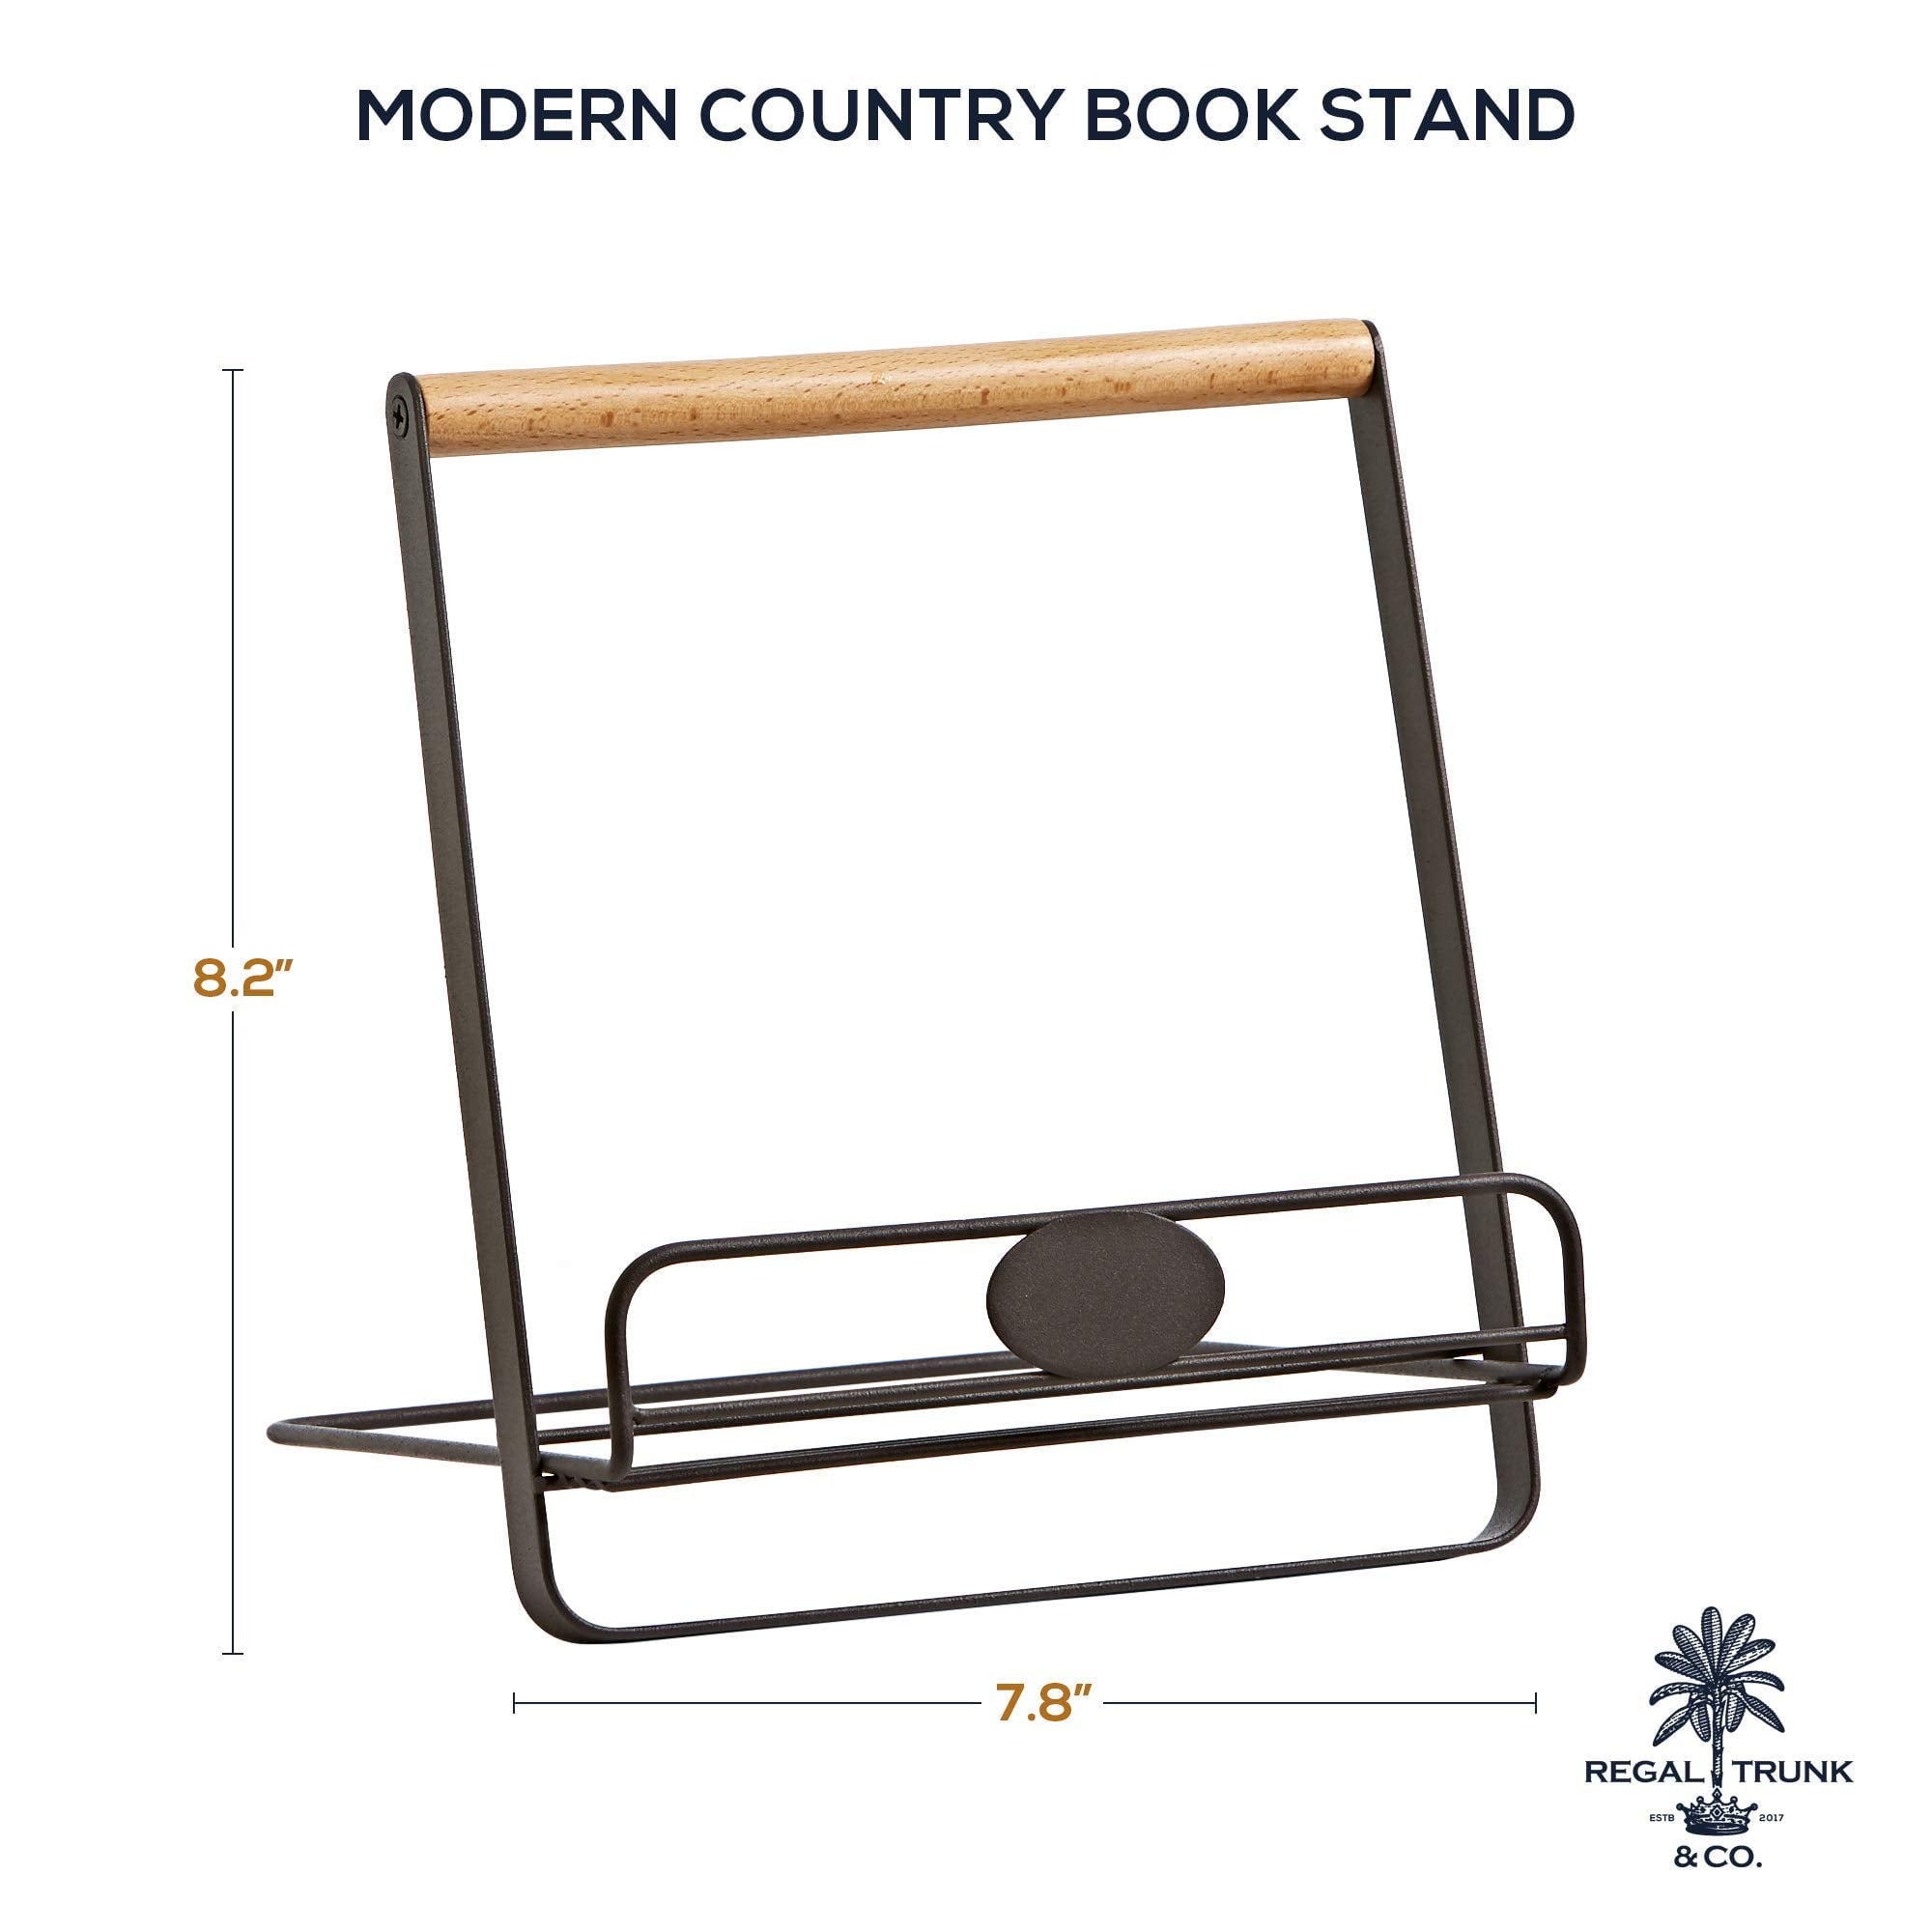 Decorative Metal Cookbook Stand Recipe Book Holder Easel – Trenton Gifts